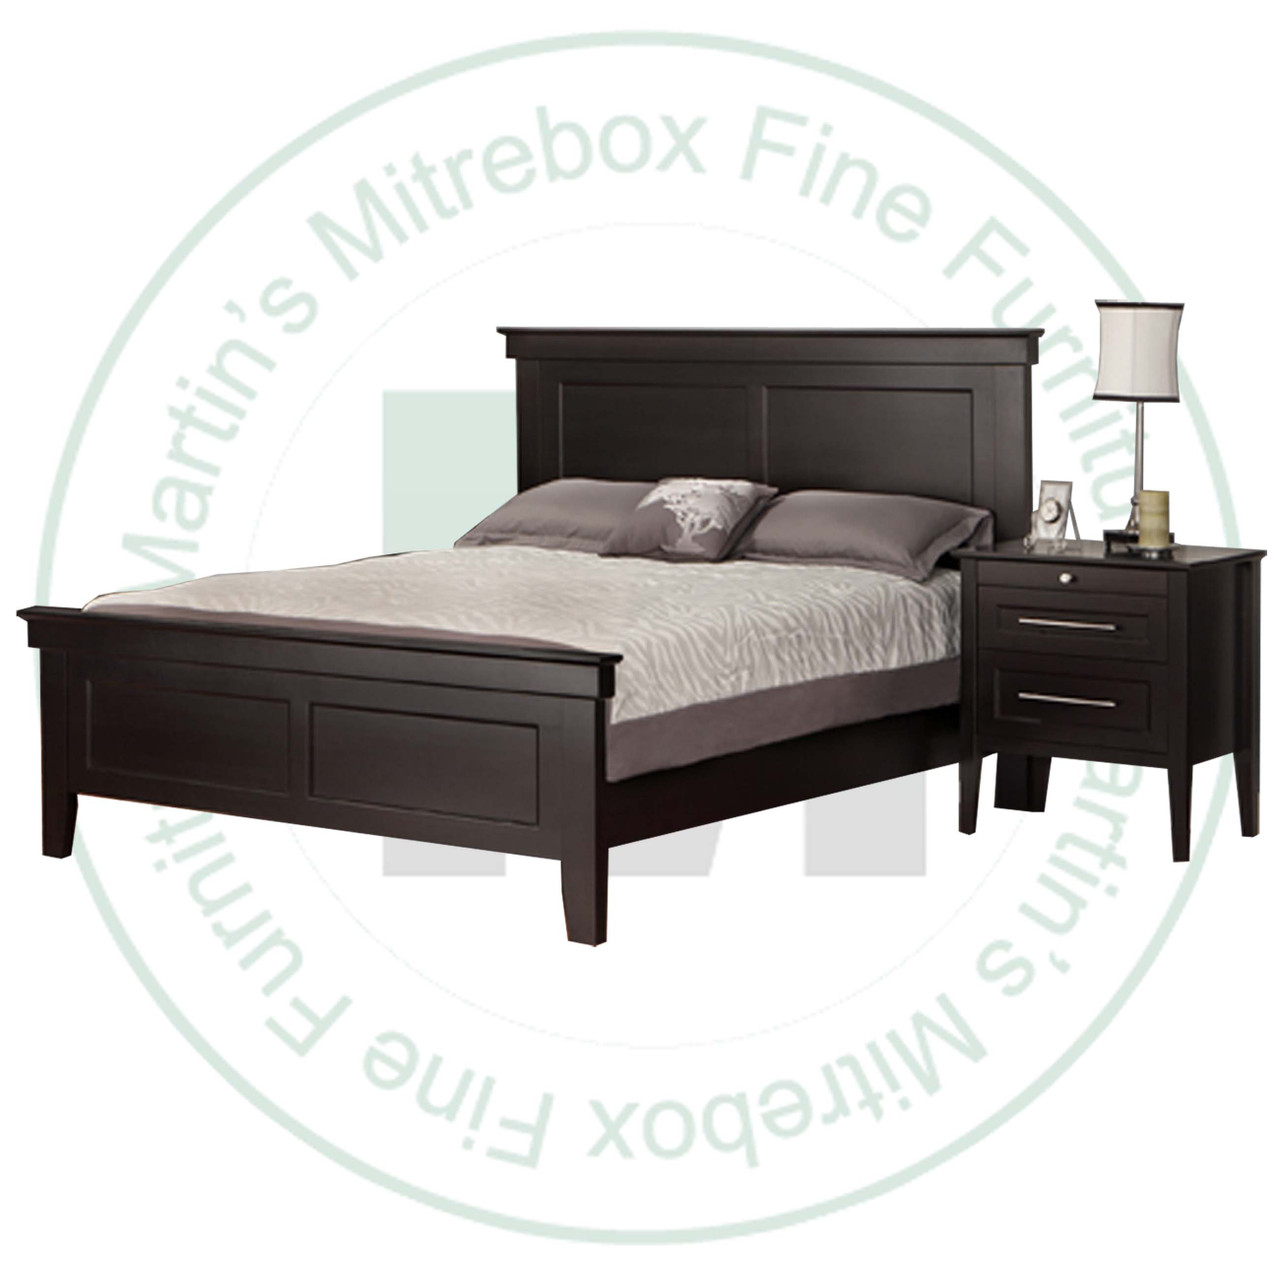 Maple Stockholm Double Bed With Low Footboard